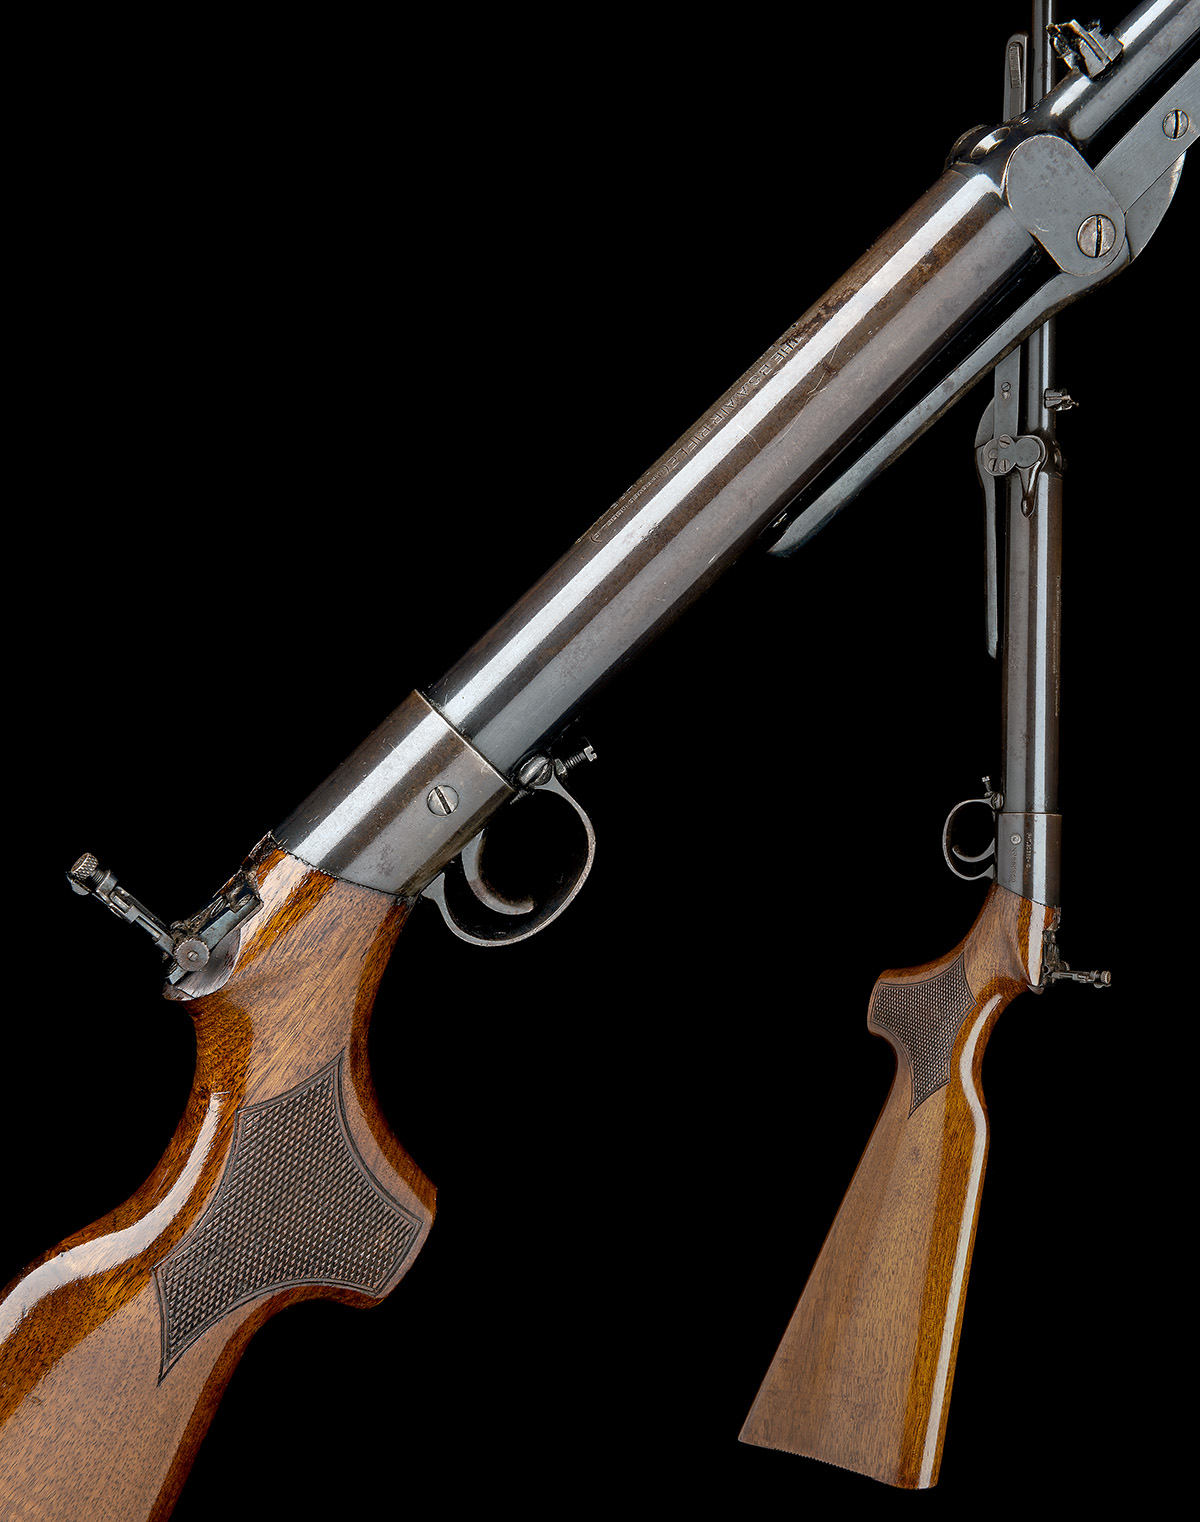 BSA, BIRMINGHAM A SCARCE .177 UNDER-LEVER AIR-RIFLE, MODEL 'IMPROVED MODEL 'D' WITH FACTORY - Image 7 of 7